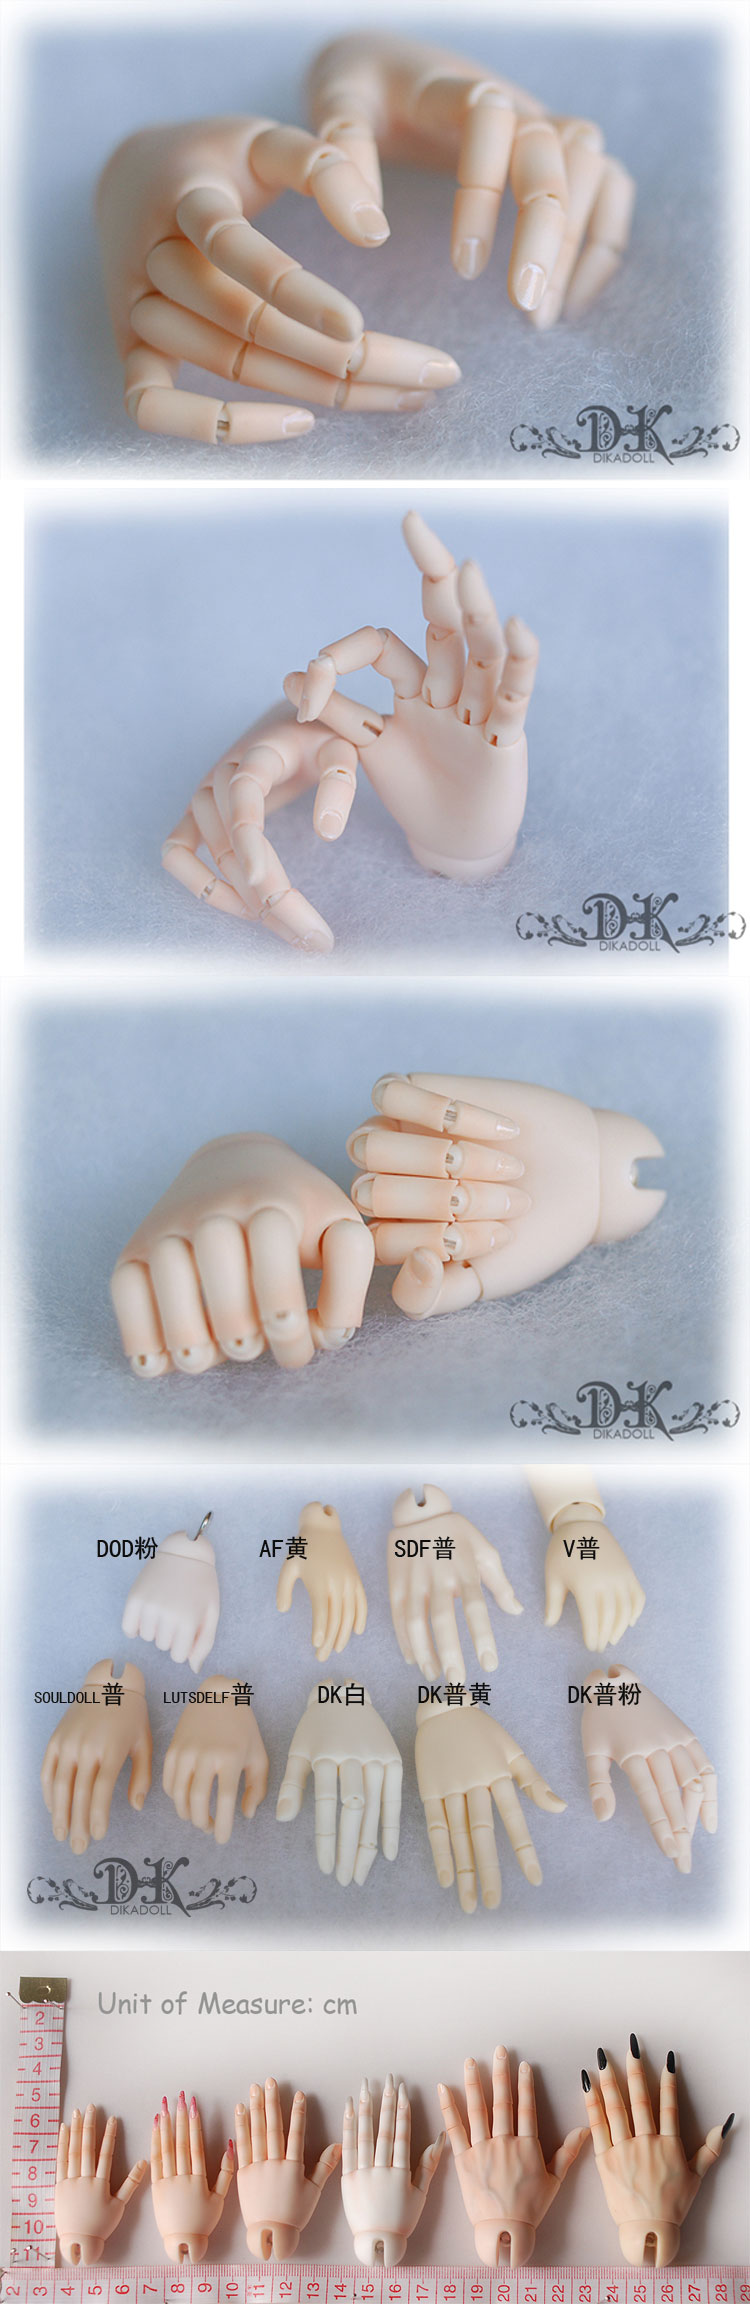 Ball Jointed Hand For Sd Bjd Ball Jointed Doll Dika Doll Ball Jointed Hand Doll Parts Bjd